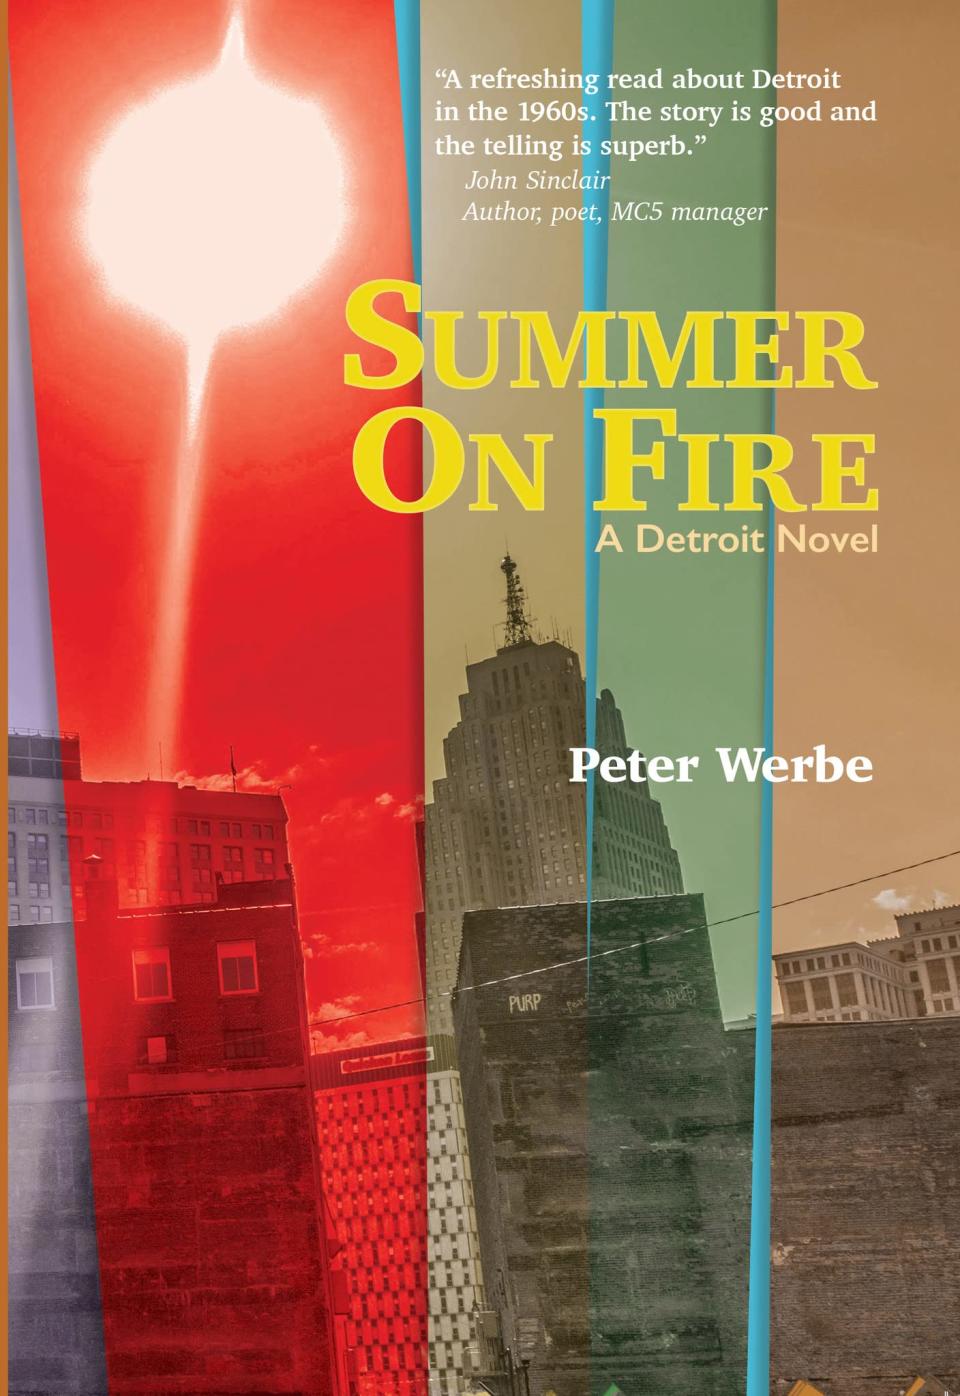 "Summer on Fire: A Detroit Novel" by Peter Werbe, who is from Royal Oak.